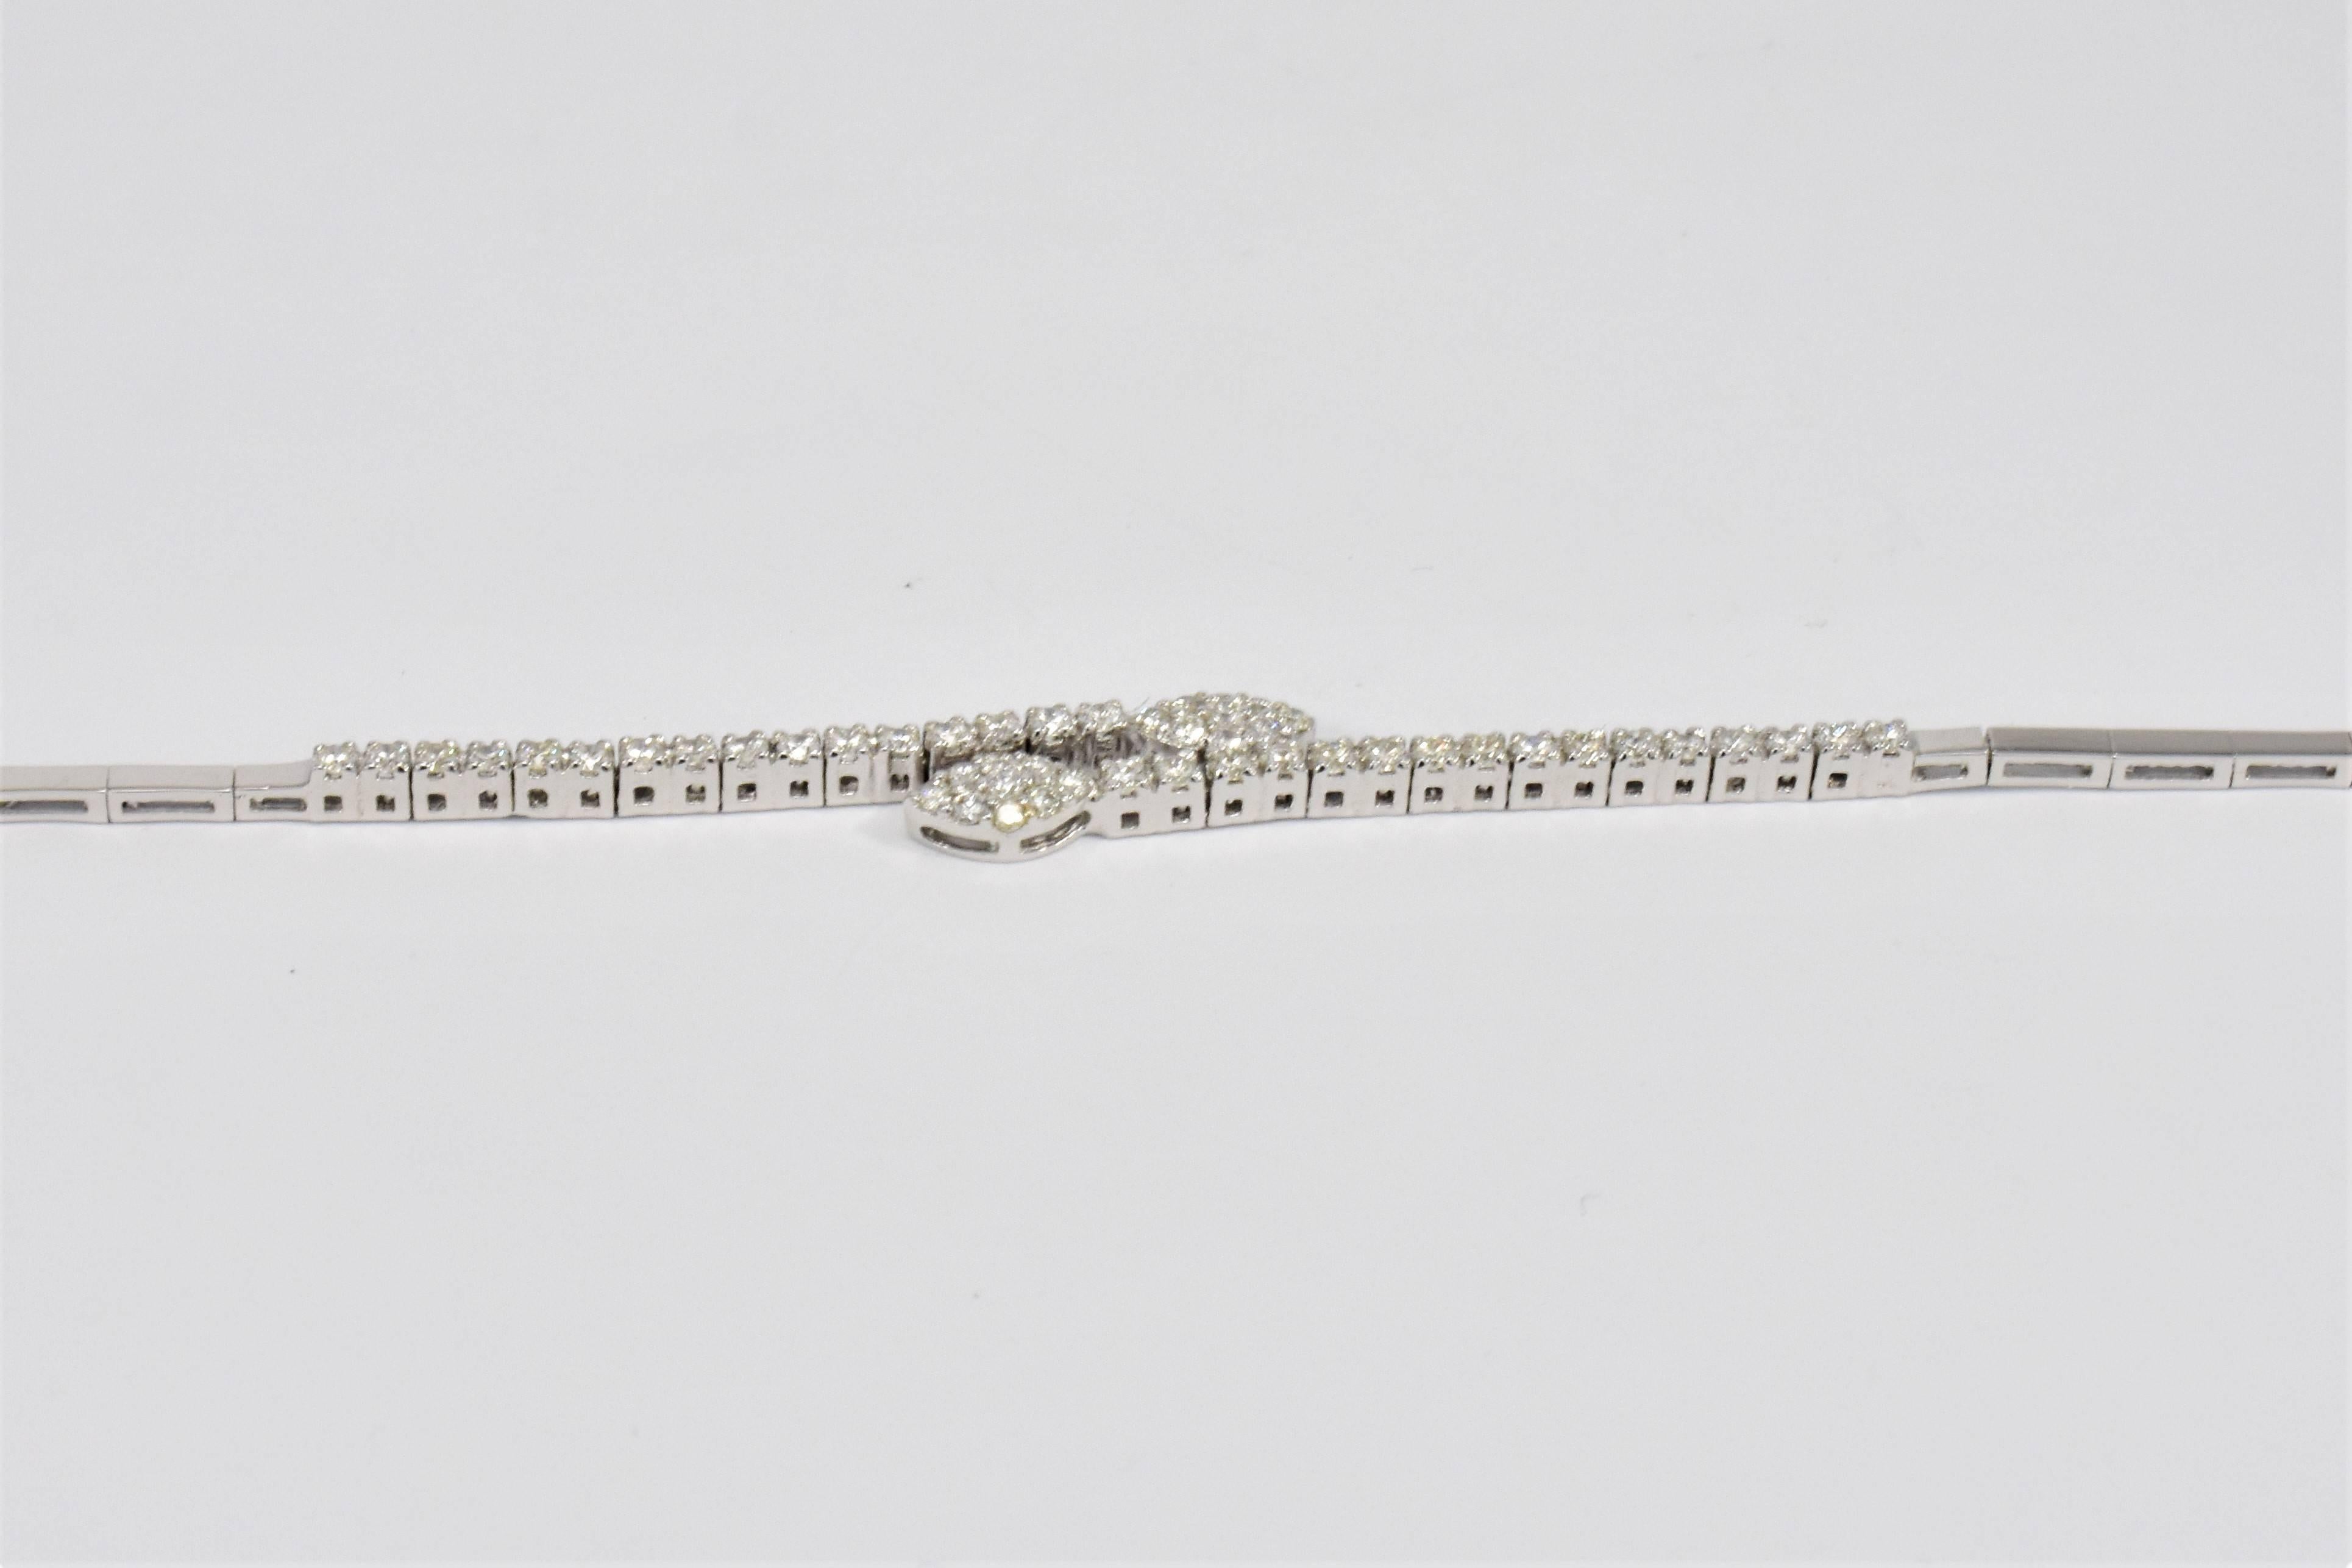 A lovely bracelet reminiscent of leaf buds or flames made up in many sparkling brilliant cut diamonds. The carefully set small round brilliant diamonds with larger diamonds in the centre form the marquise shapes to dazzling effect set in 18ct white